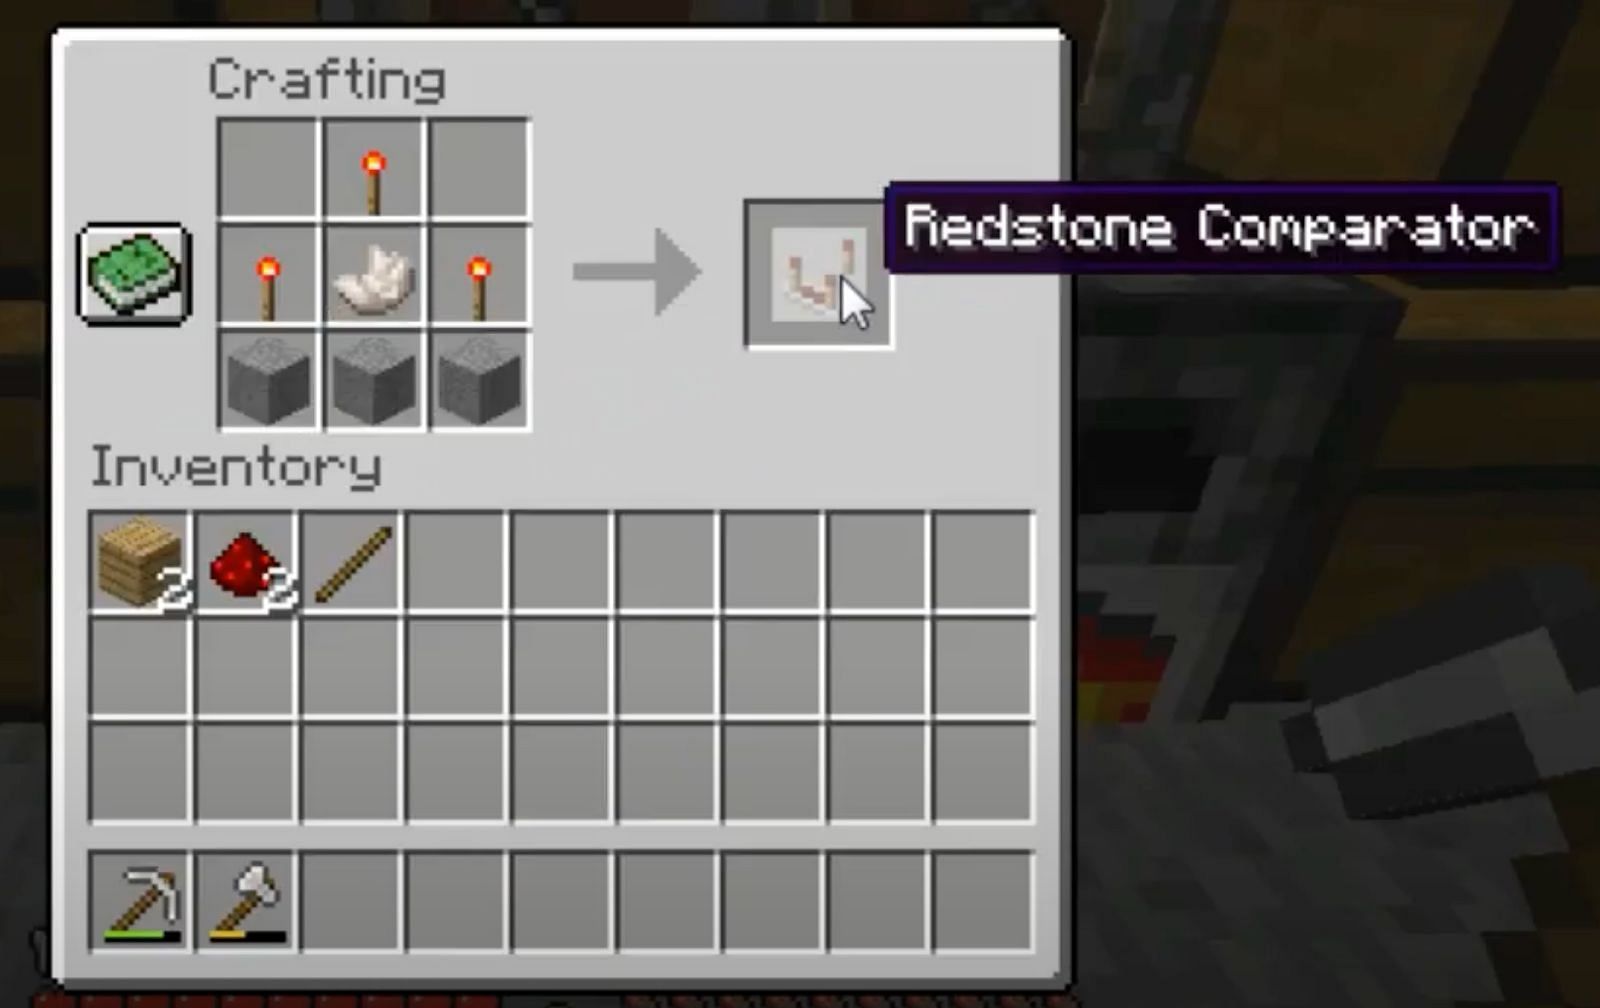 How to Craft a Redstone Comparator in Minecraft?